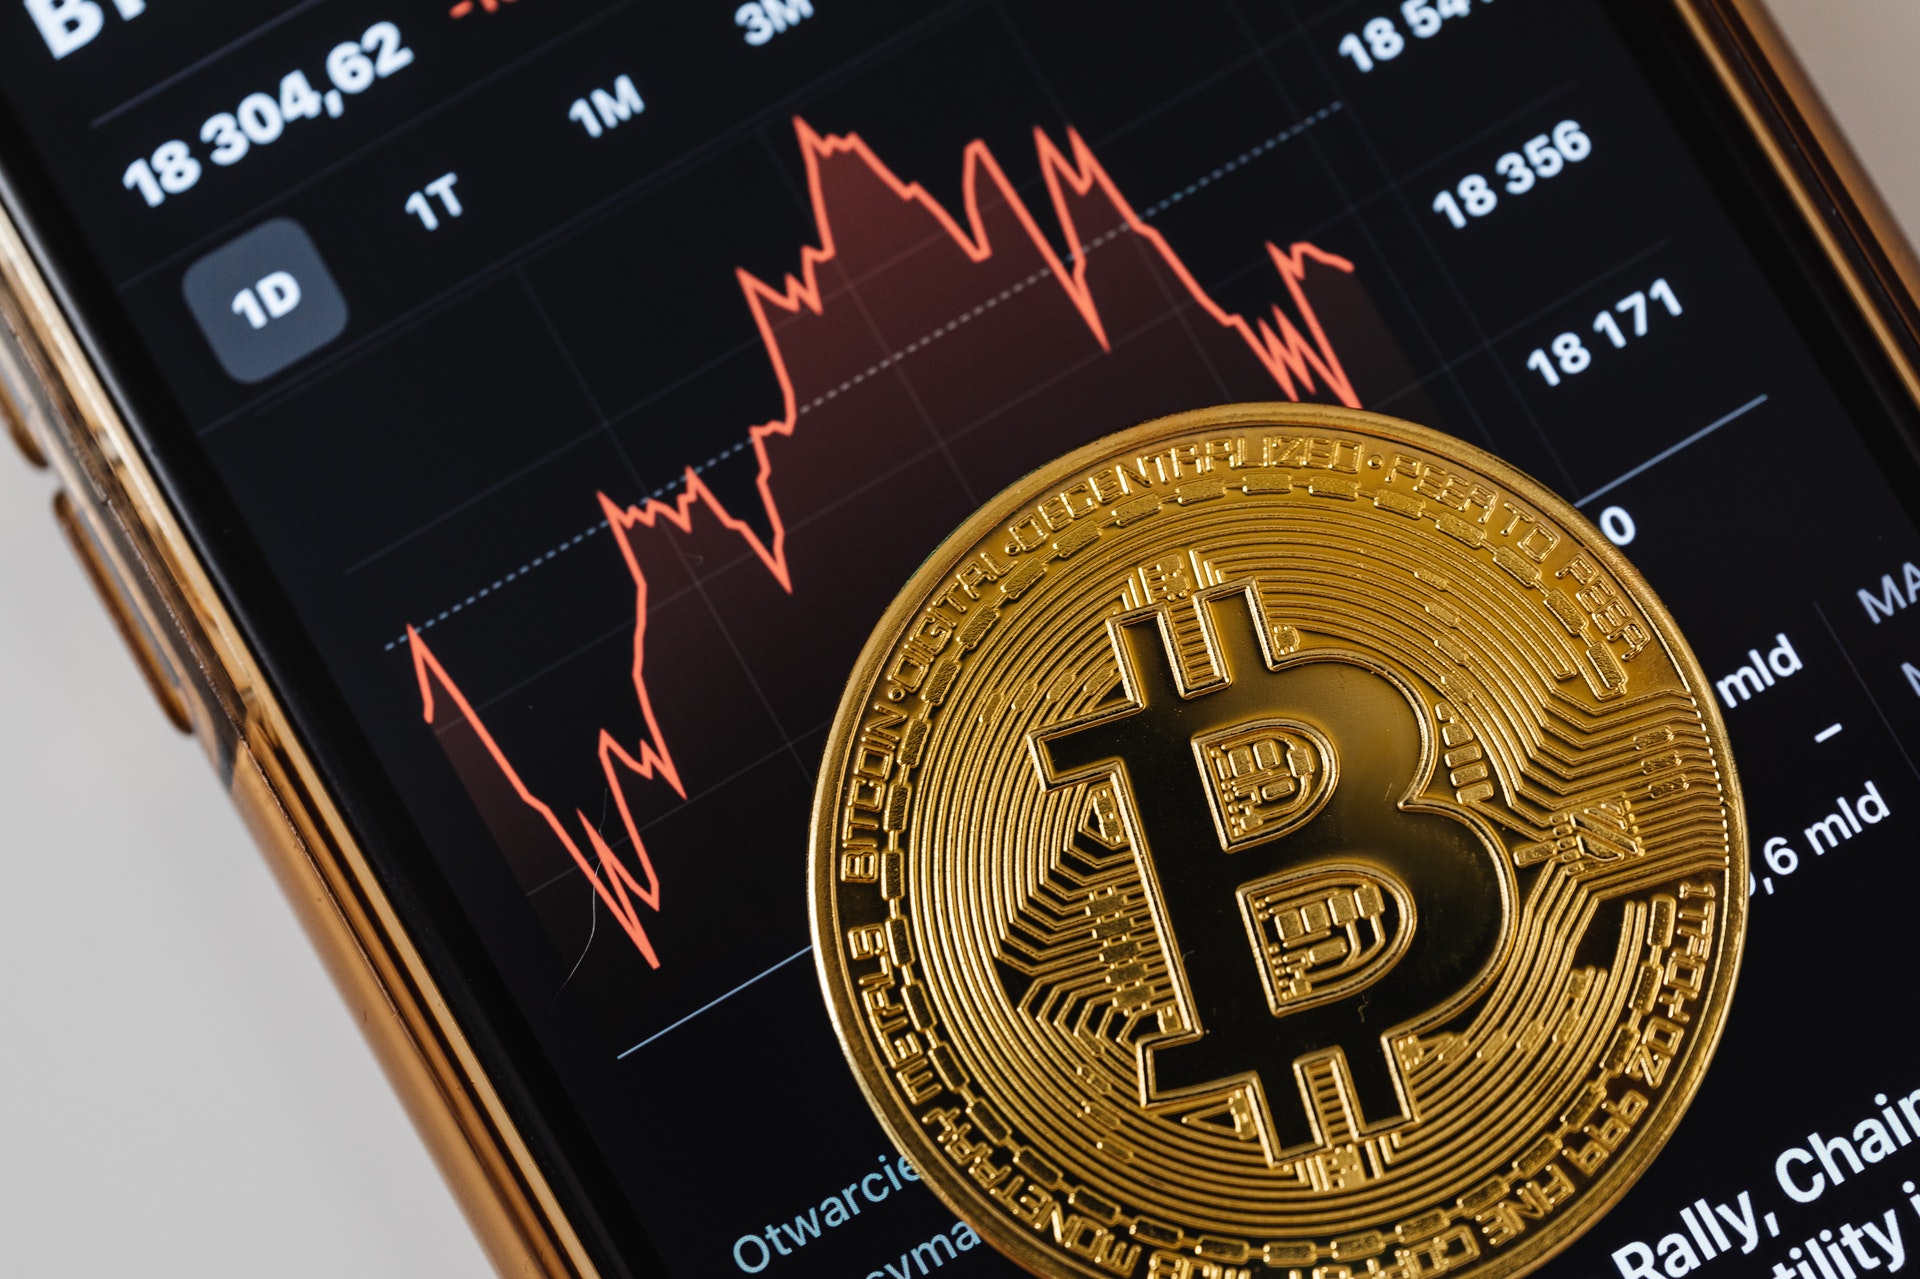 Bitcoin (BTC) Price to Hit $1 Million by 2033 and $200,000 by 2025: Bernstein Analysts